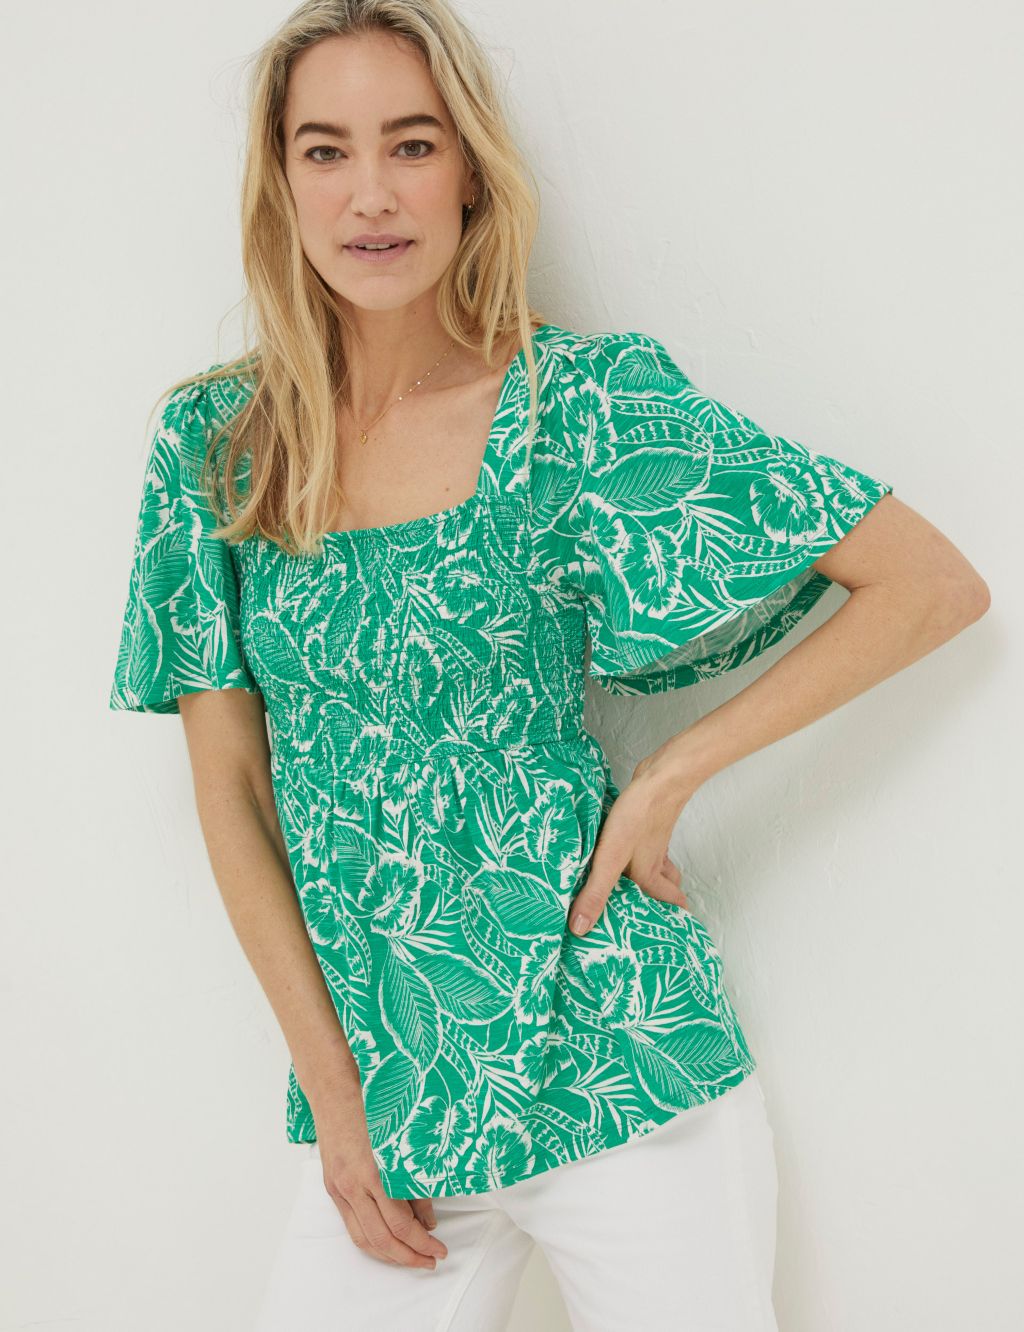 Cotton Modal Blend Printed Shirred Top image 1